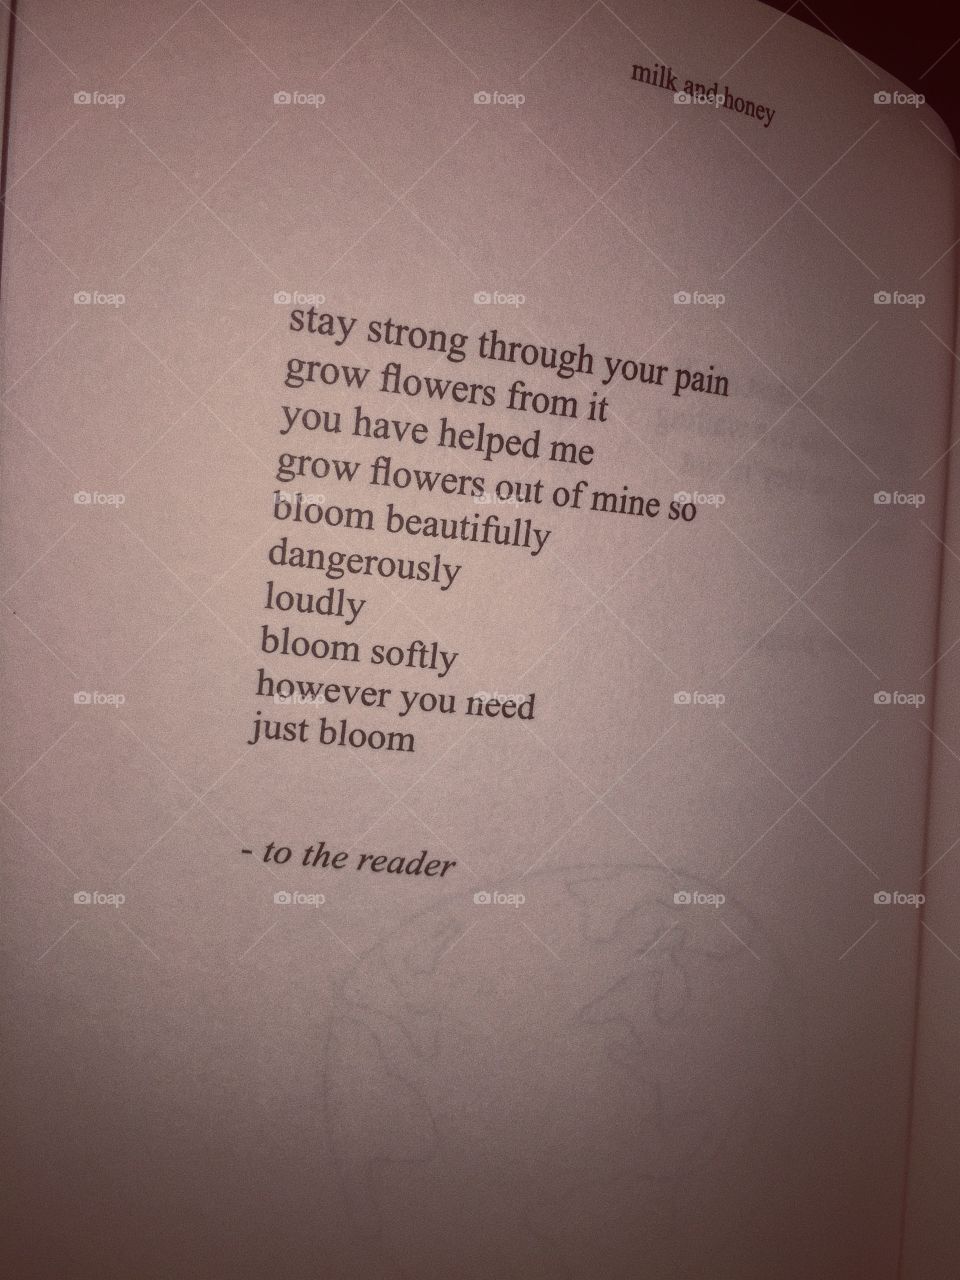 Poem from Milk and Honey 